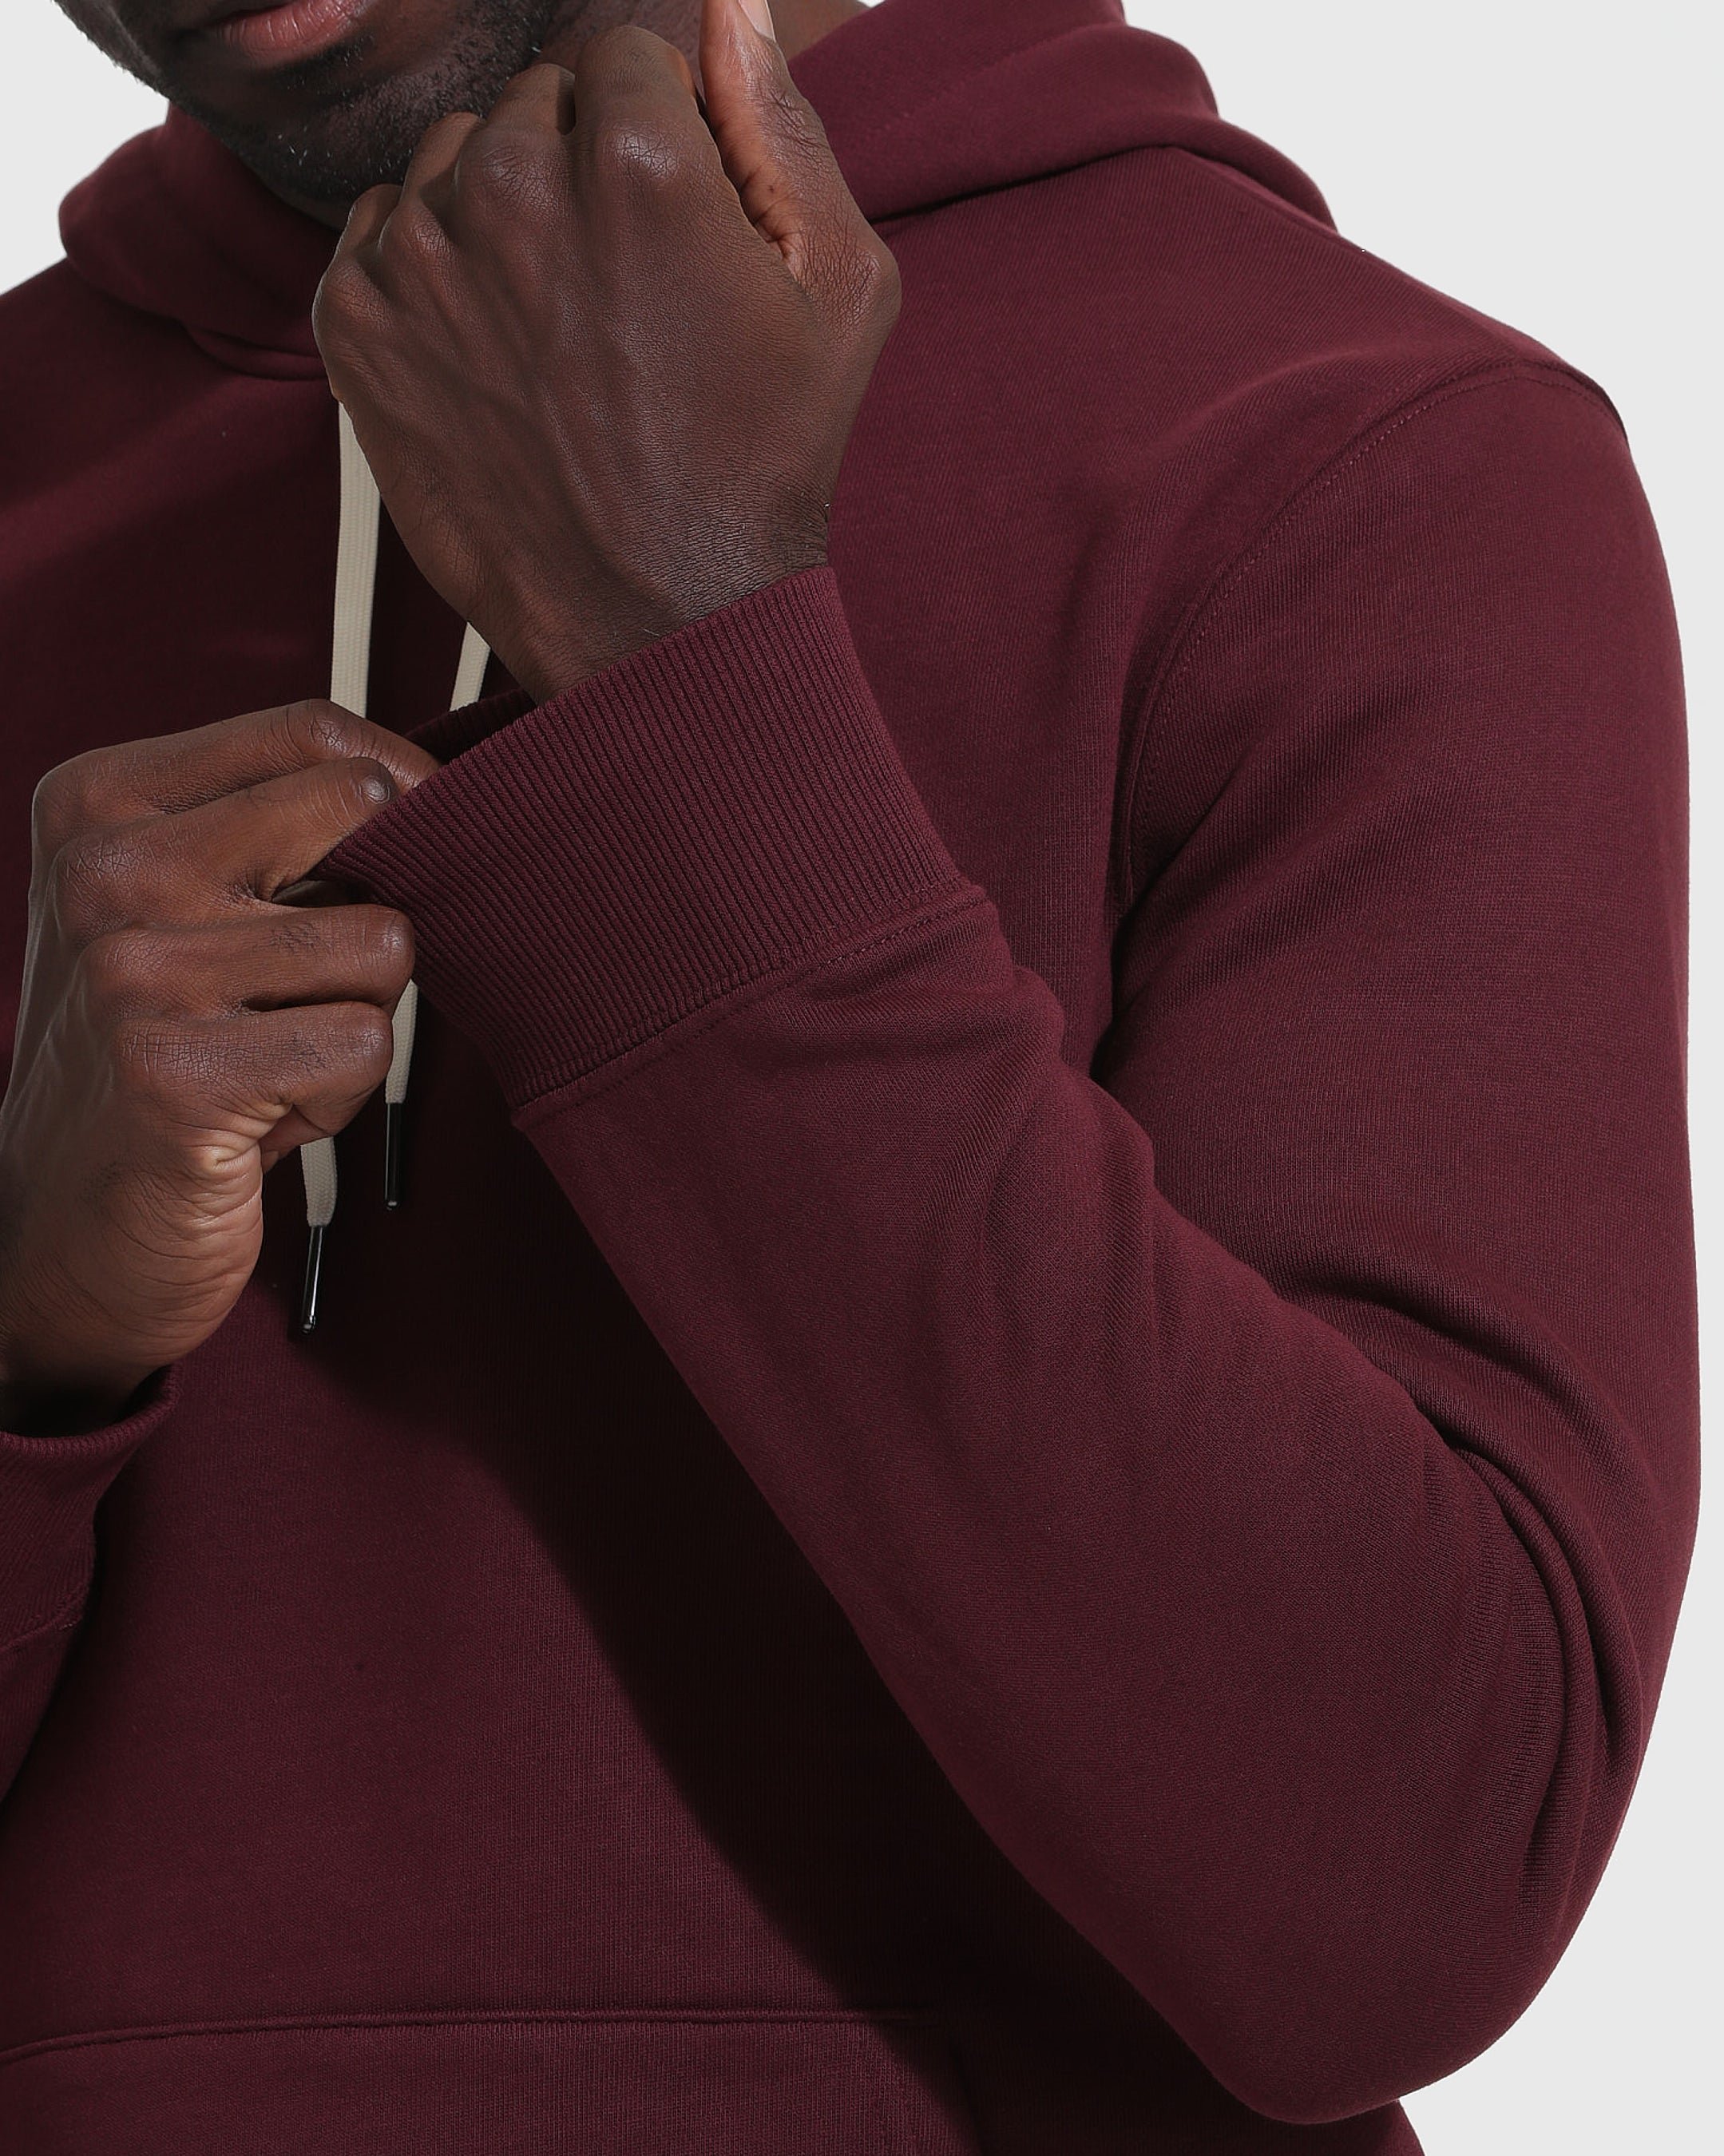 Mahogany Fleece French Terry Pullover Hoodie